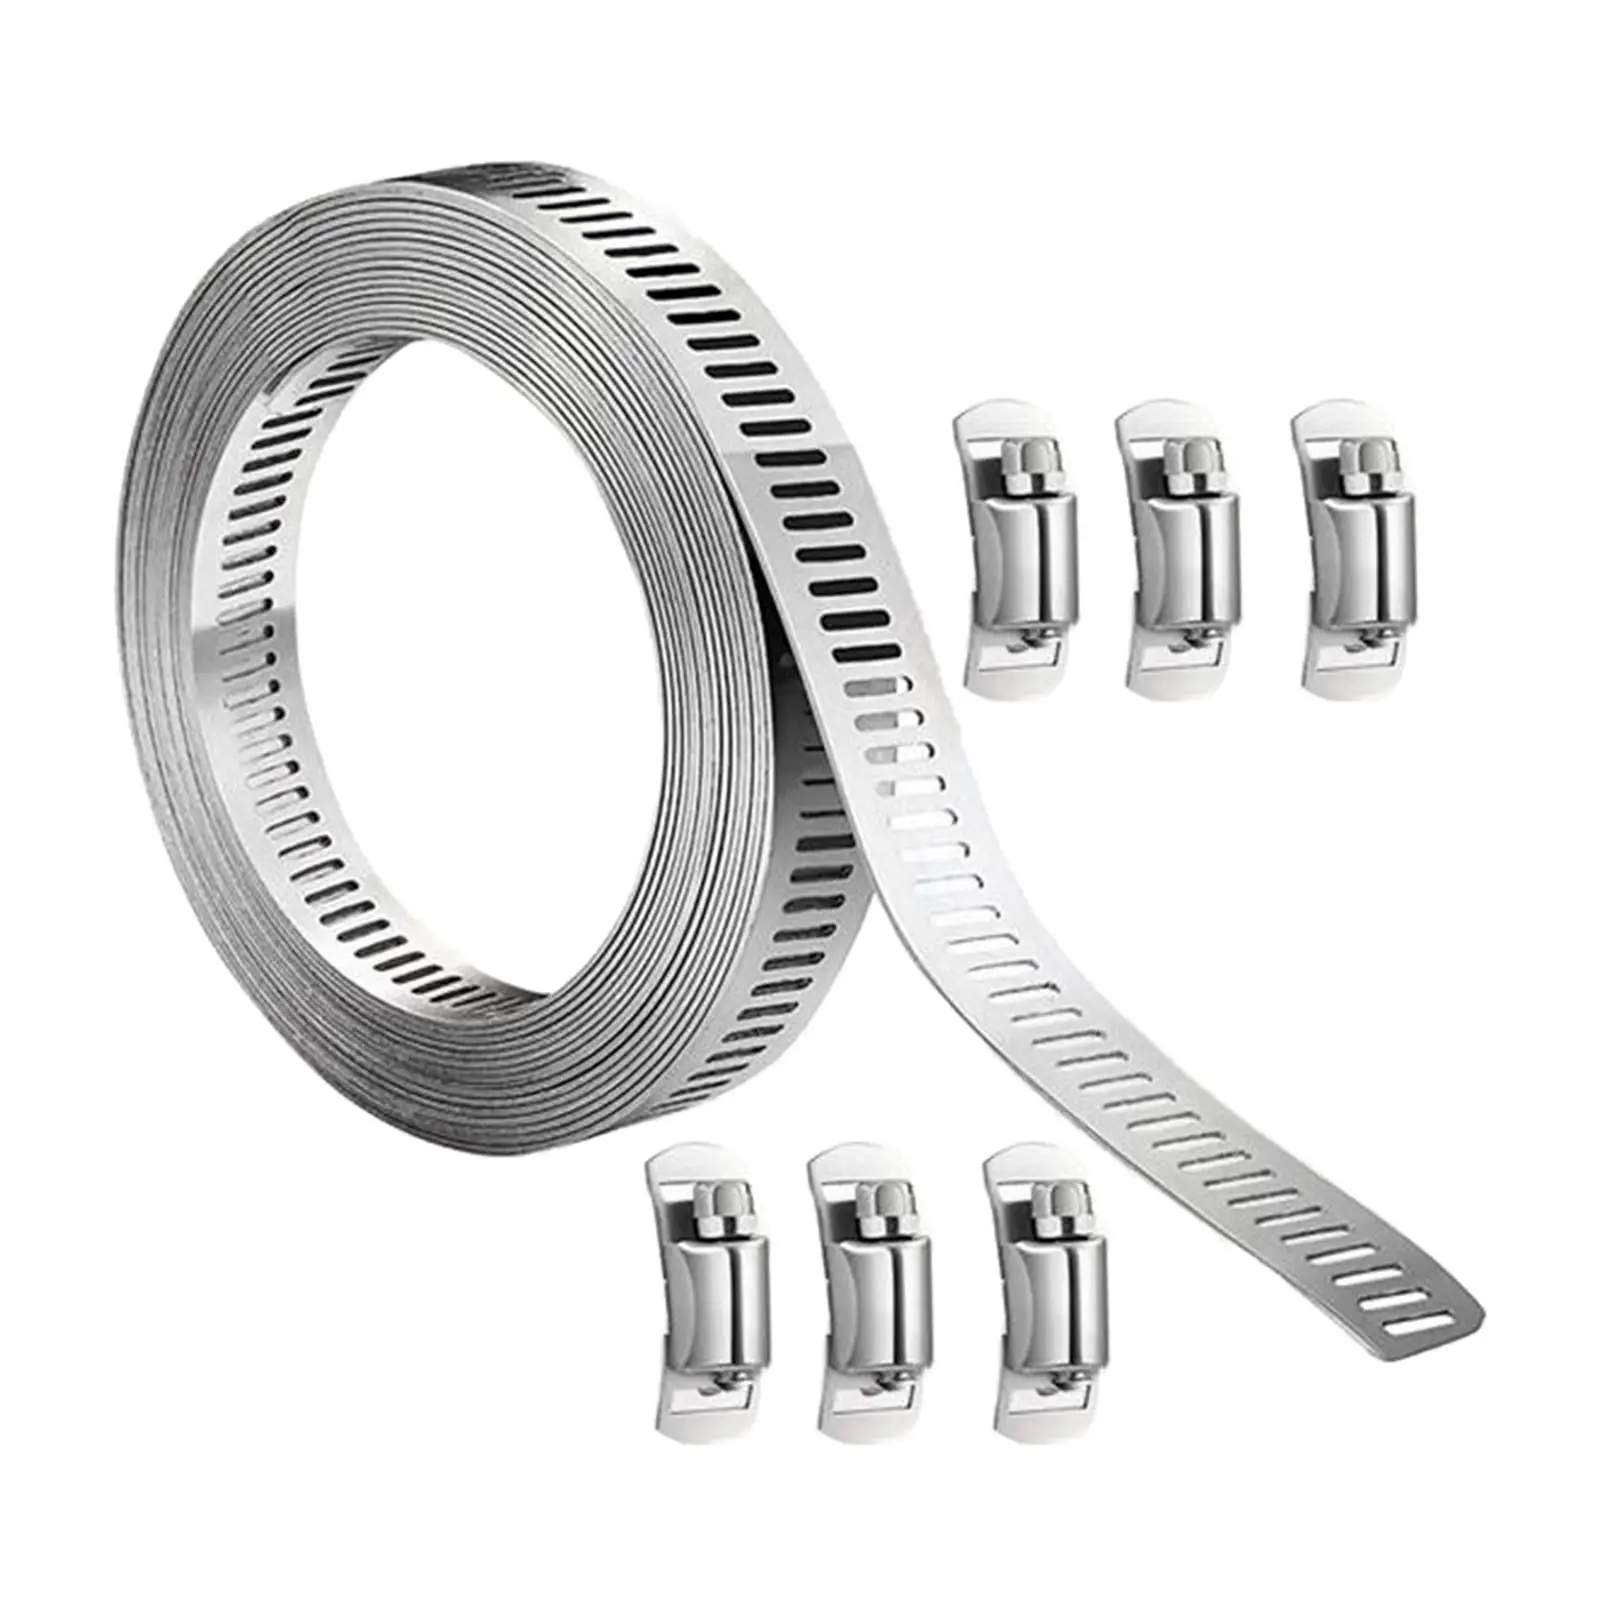 Hose Clamp with 8Pcs Fasteners Adjustable Fuel enduring Line Hose Clamp Worm Gear Hose Clamp for Plumbing